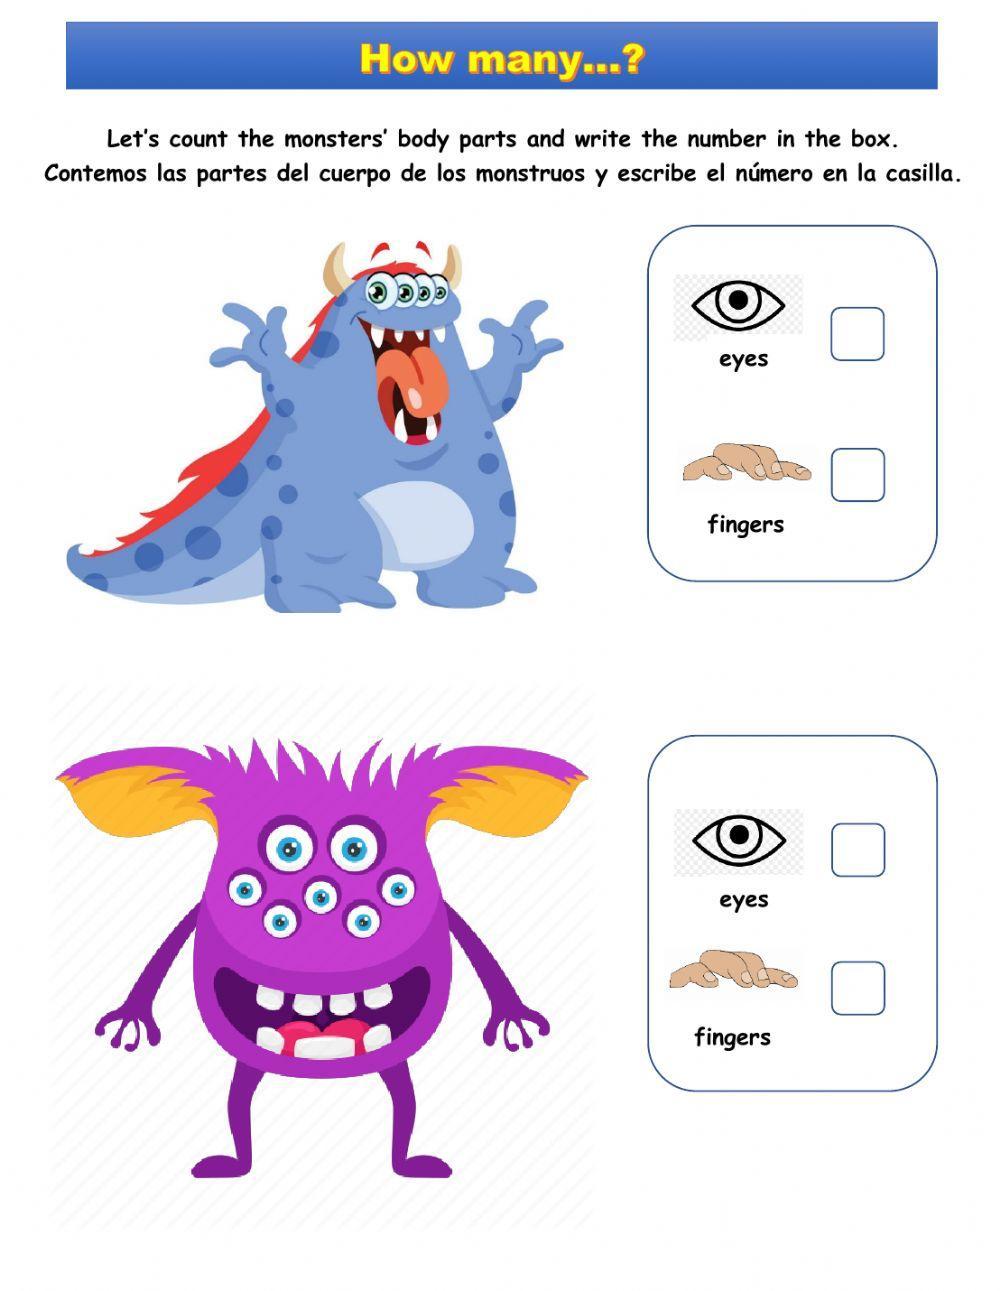 Kinder Monsters' body parts counting